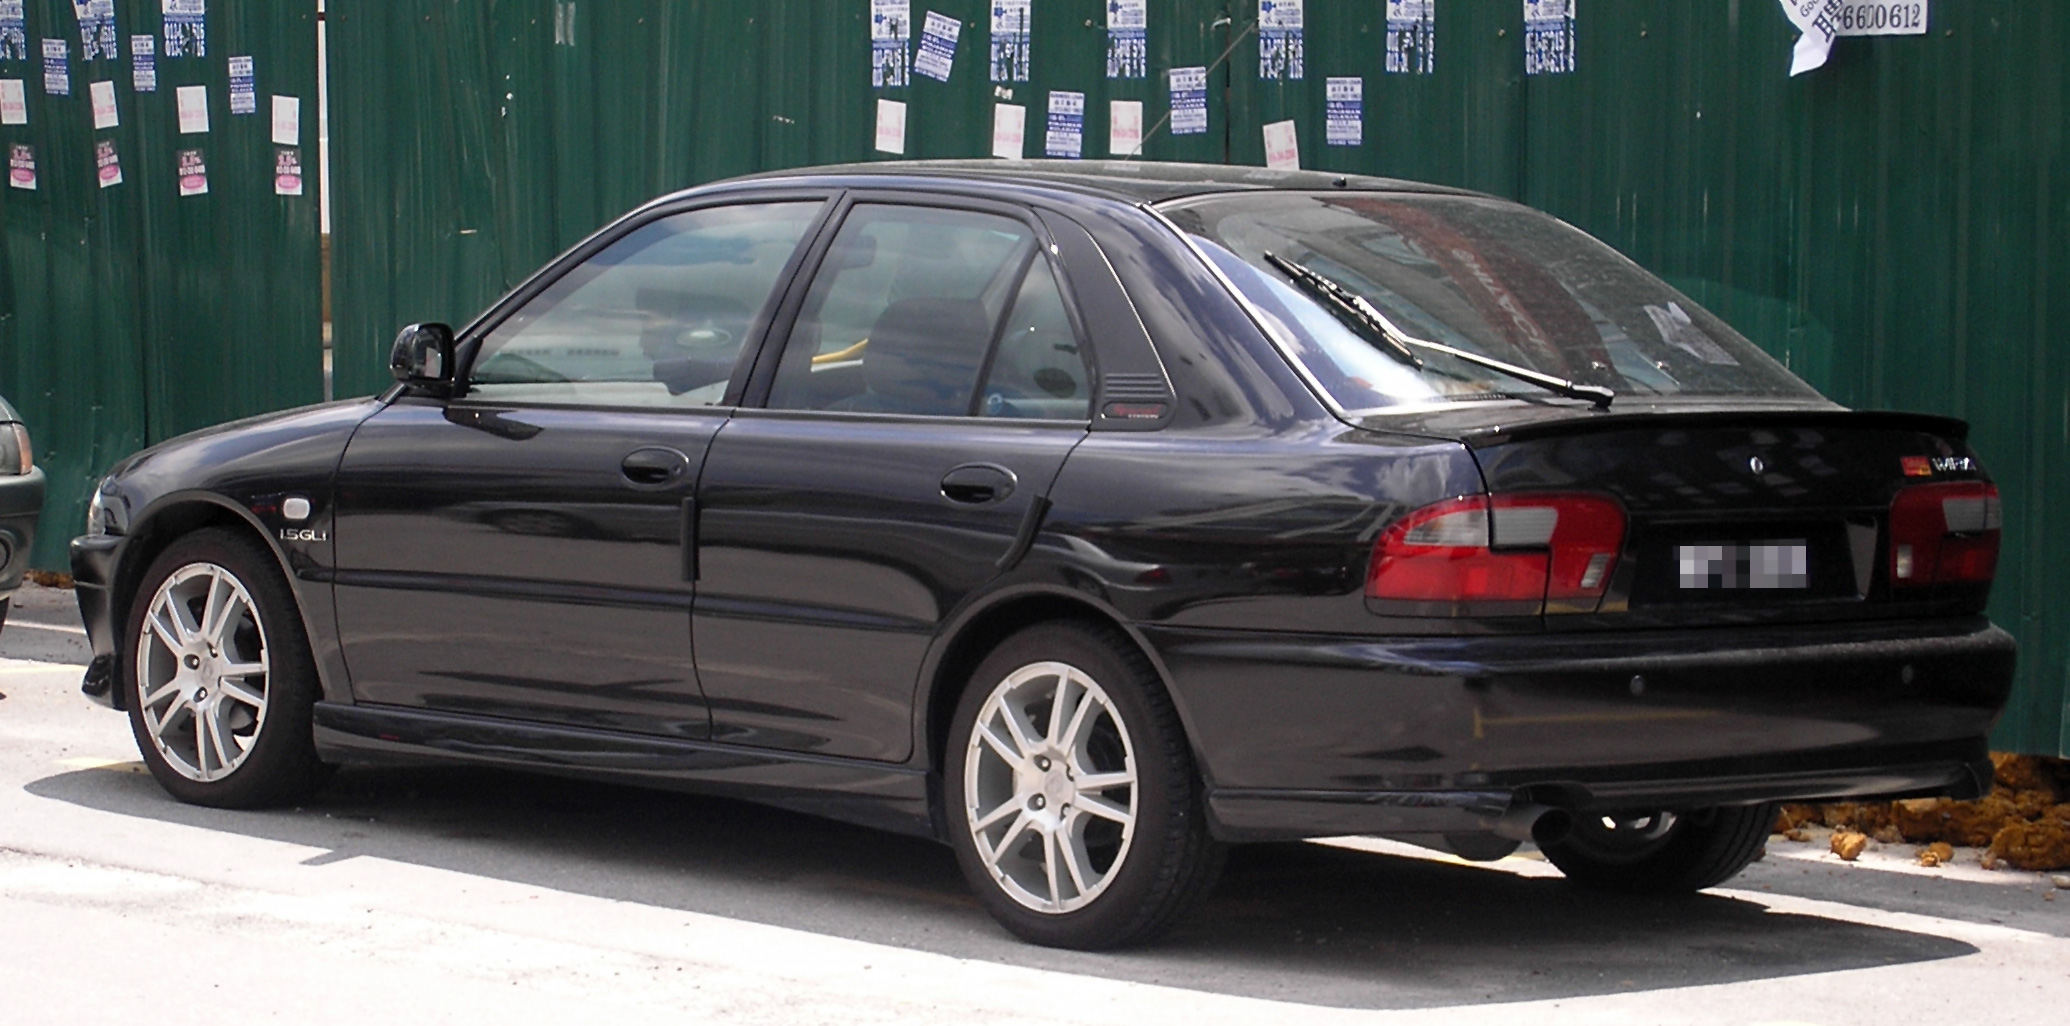 File:Proton Wira (Aeroback, Special Edition) (first generation ...